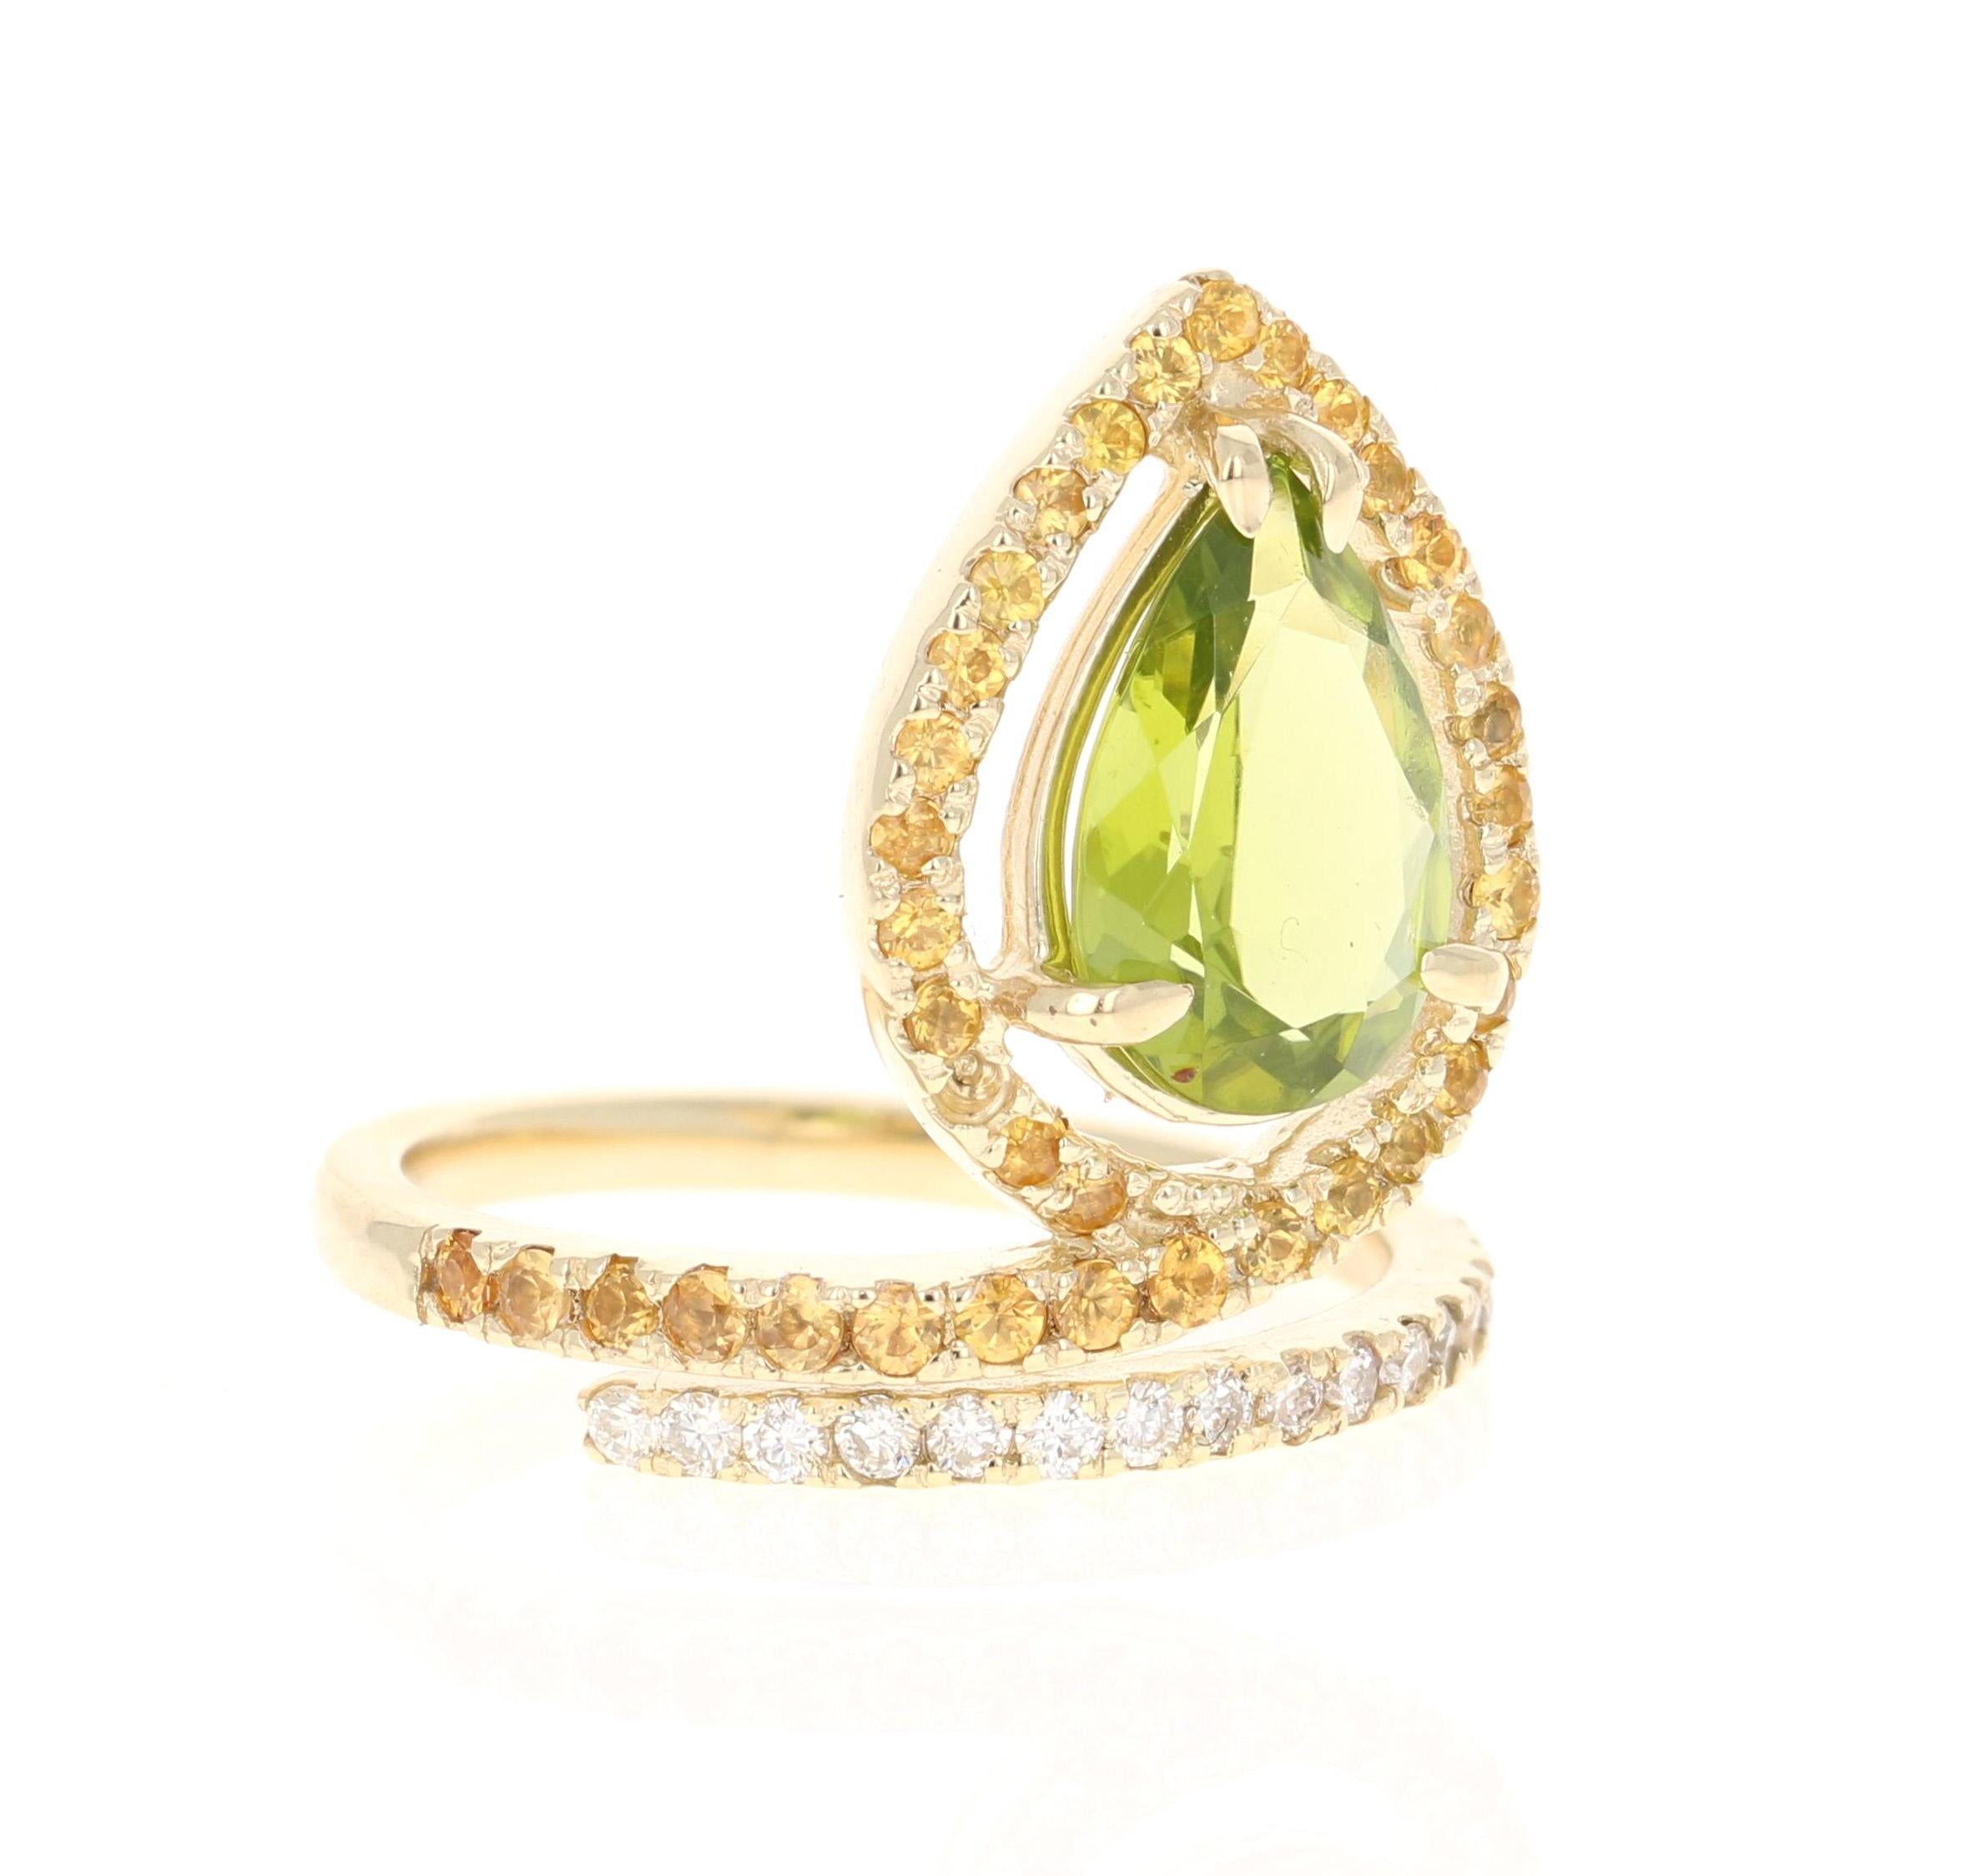 This beautiful ring has a Pear Cut Peridot in the center that weighs 2.61 carats. The ring is surrounded by a halo of yellow sapphires and wraps around with diamonds. There are 35 Yellow Sapphires that weigh 0.72 carats and there are 18 Round Cut